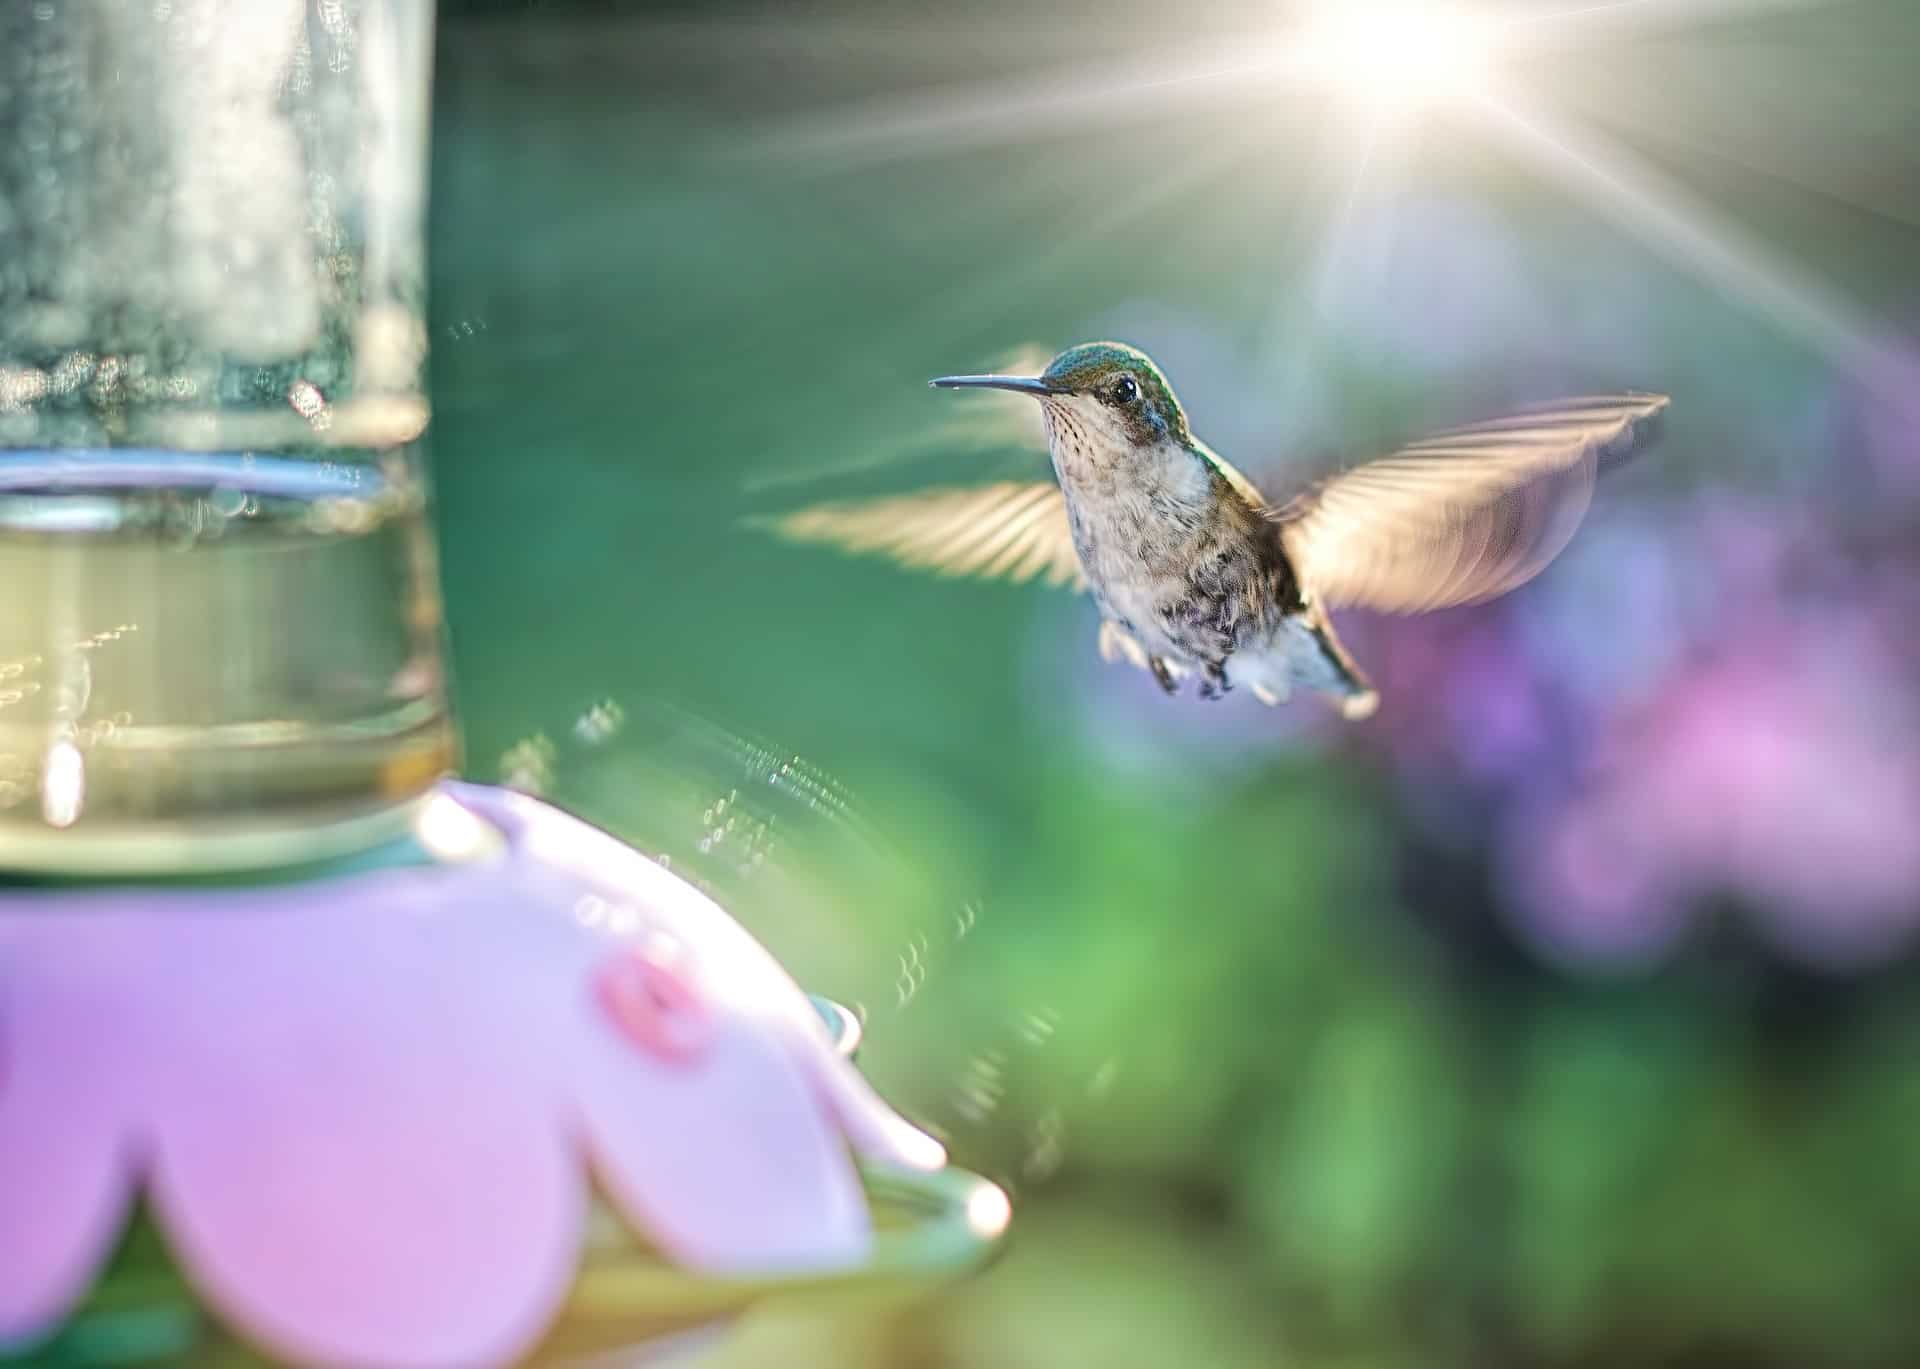 Do Hummingbirds Get Diabetes From Too Much Sugar Water?